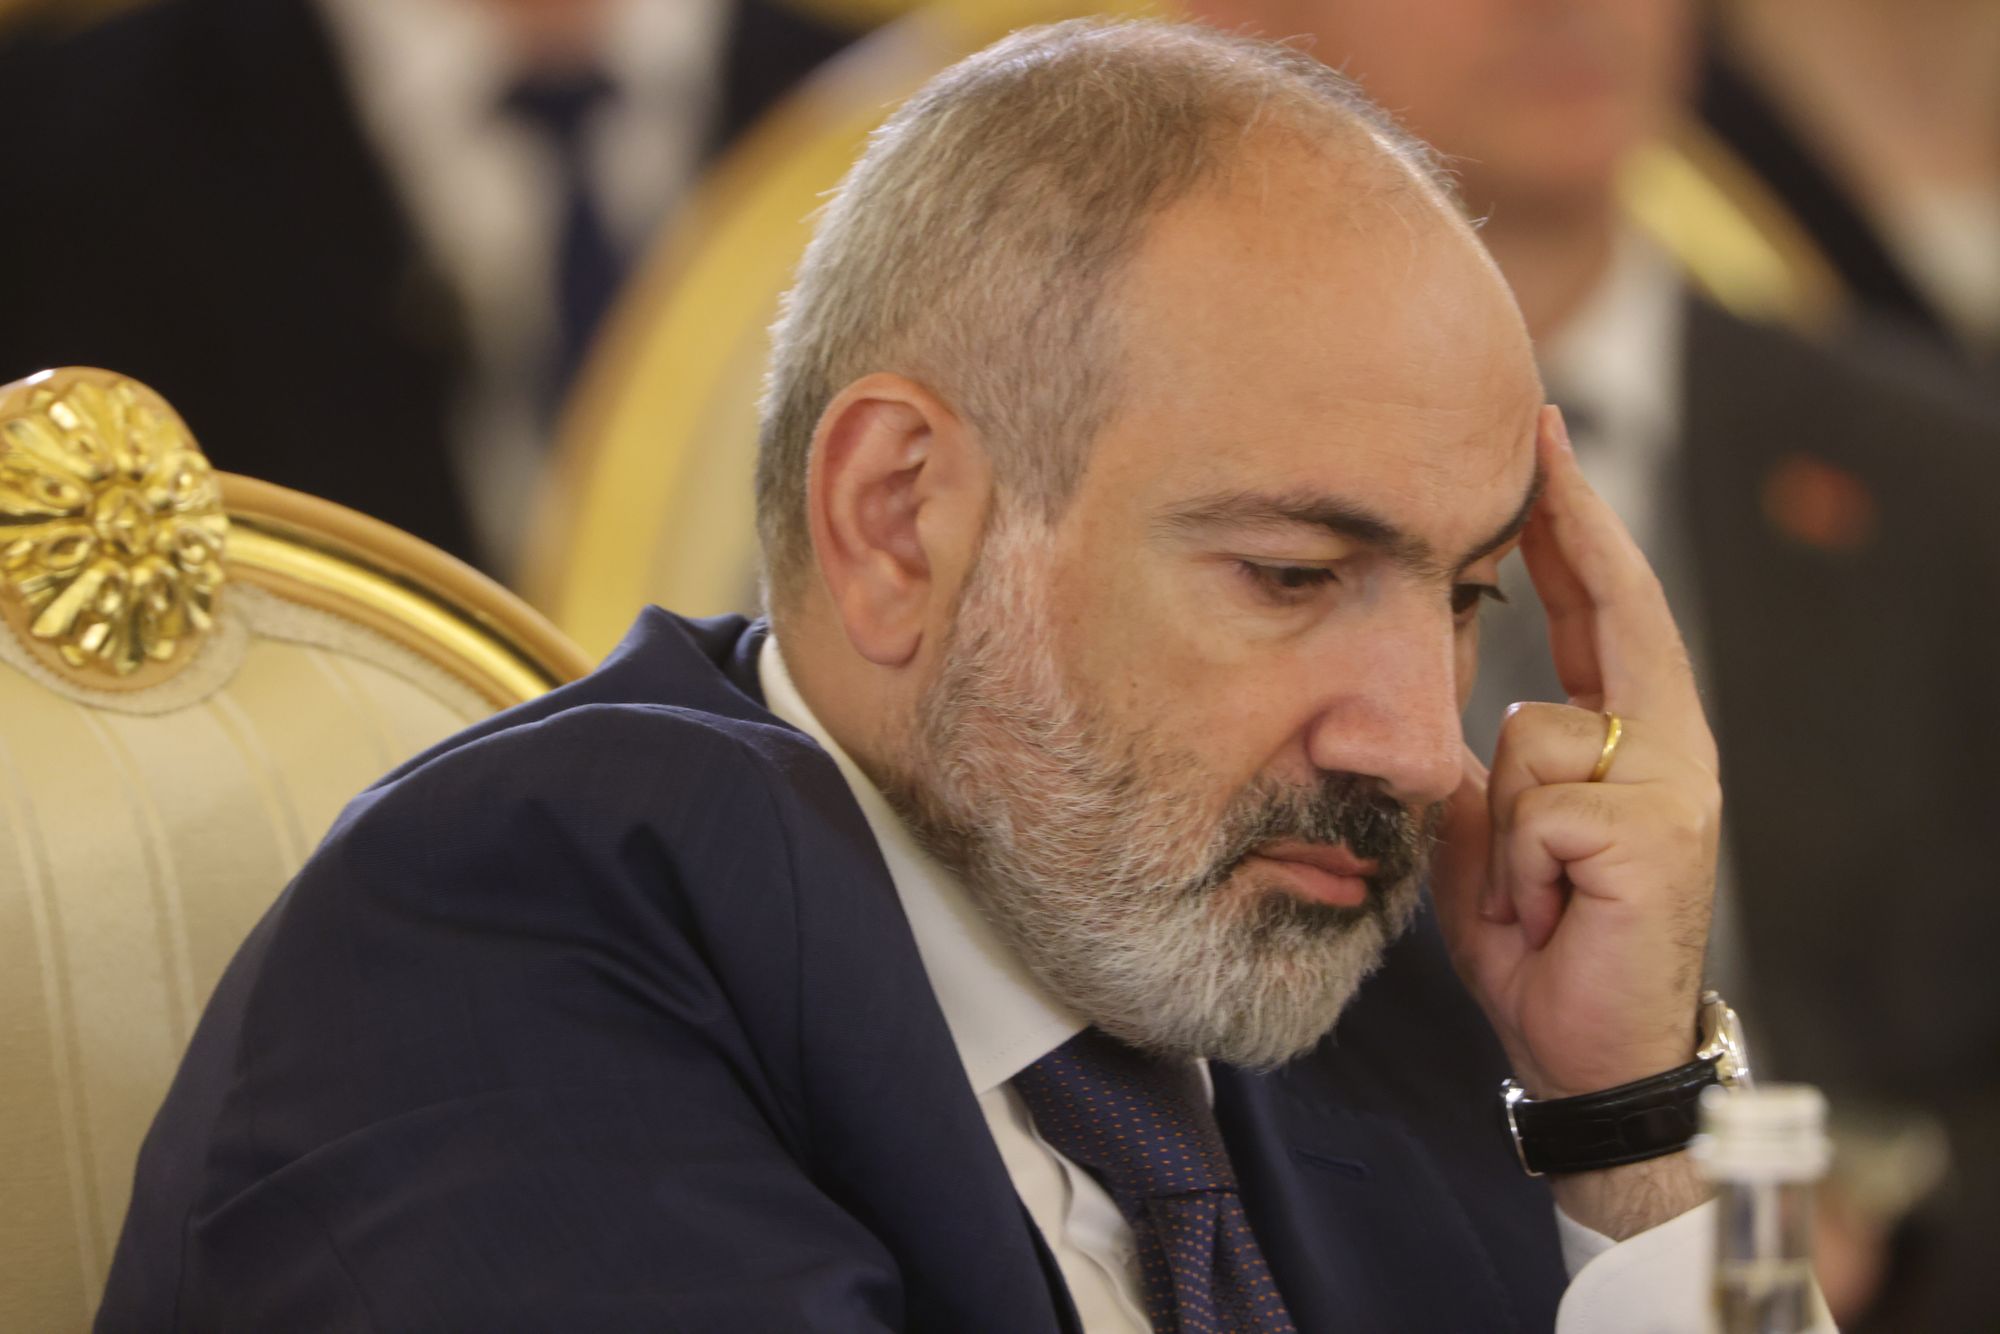 Pashinyan: Armenia cannot rely on Russia, needs to consider other partners